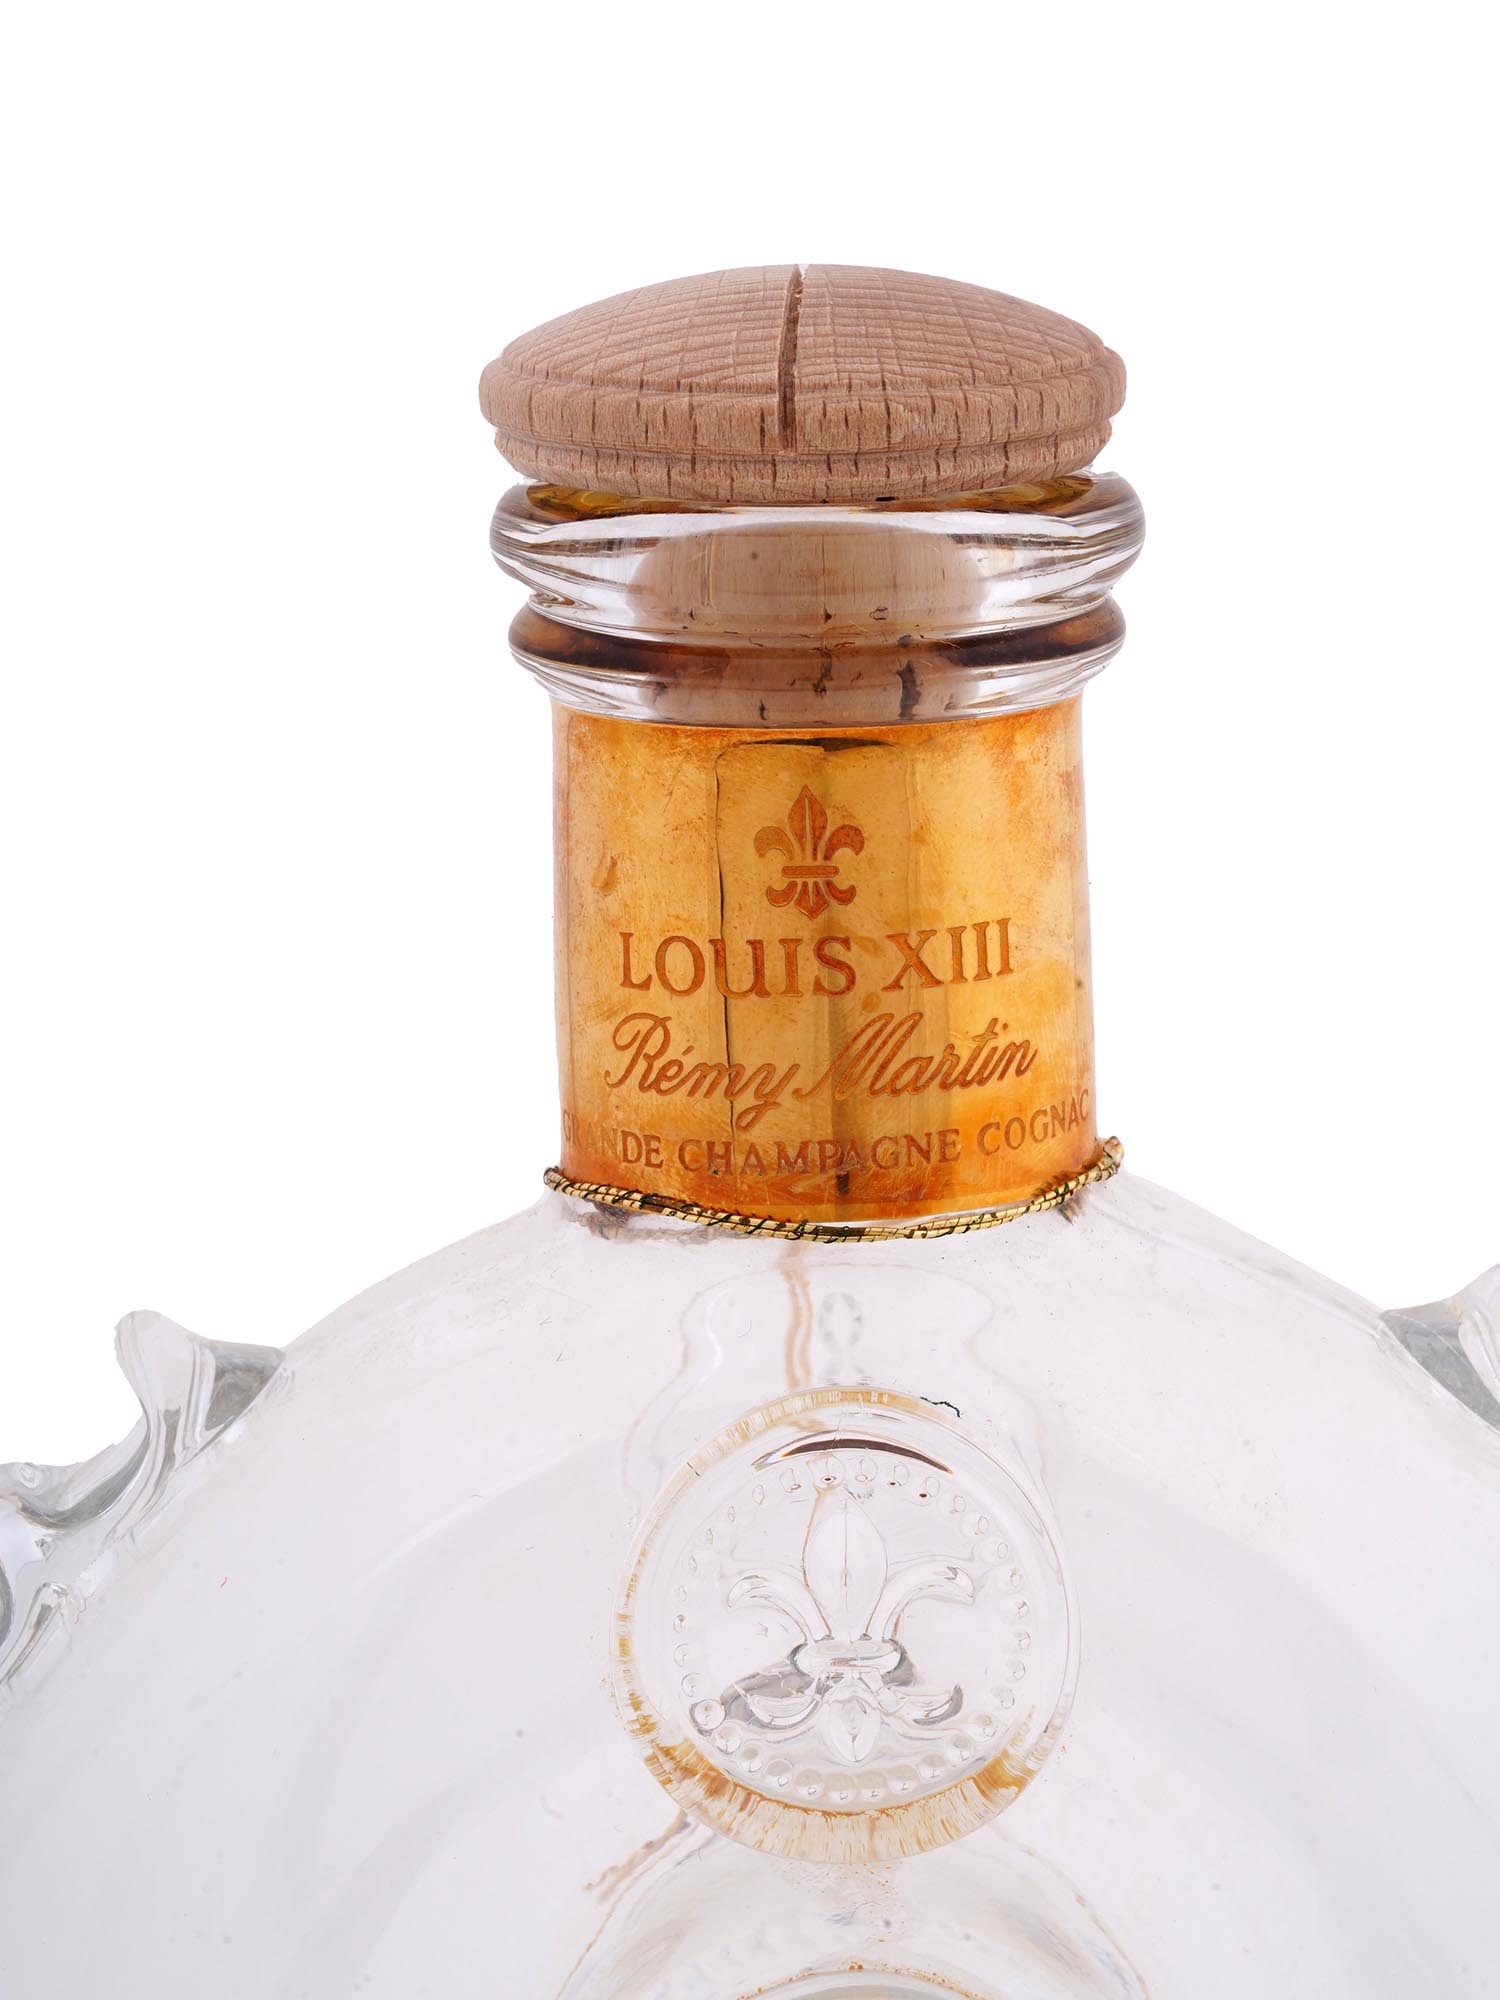 LOUIS XIII REMY MARTIN COGNAC BOTTLE AND RED BOX PIC-5